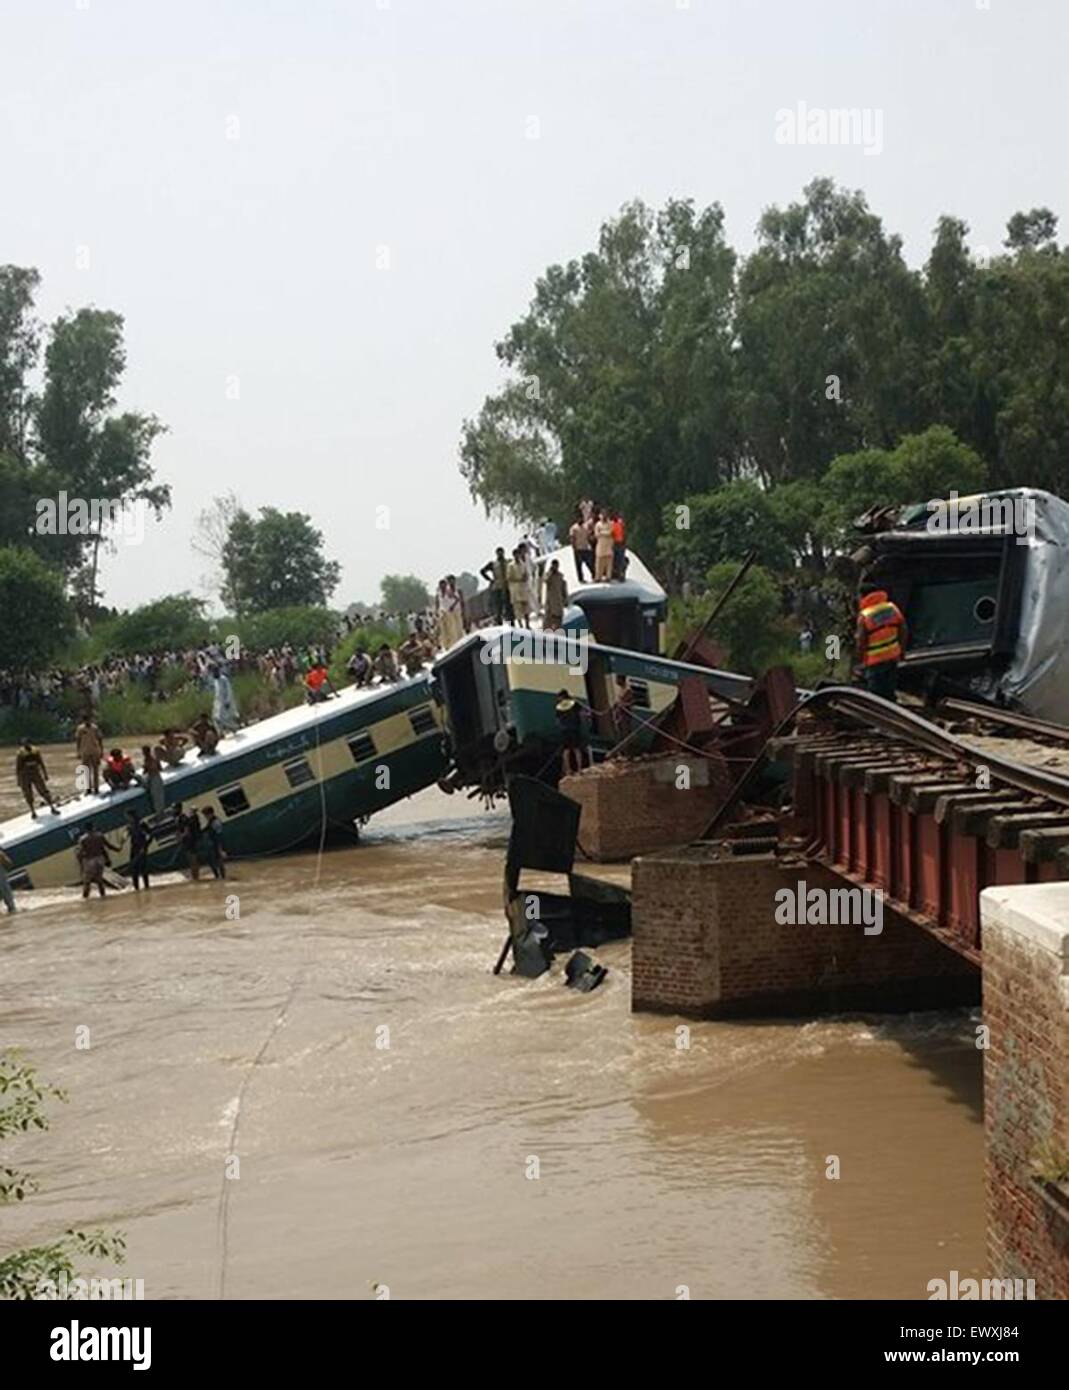 Gujranwala. 2nd July, 2015. Rescuers and local residents take part in a search operation after train compartments fell into a canal in east Pakistan's Gujranwala, July 2, 2015. At least 12 people were killed, over 100 others injured and at least four people went missing when four compartments of a train fell into a canal while crossing a bridge in Pakistan's city of Gujranwala on Thursday afternoon, local media and officials said. Credit:  Stringer/Xinhua/Alamy Live News Stock Photo